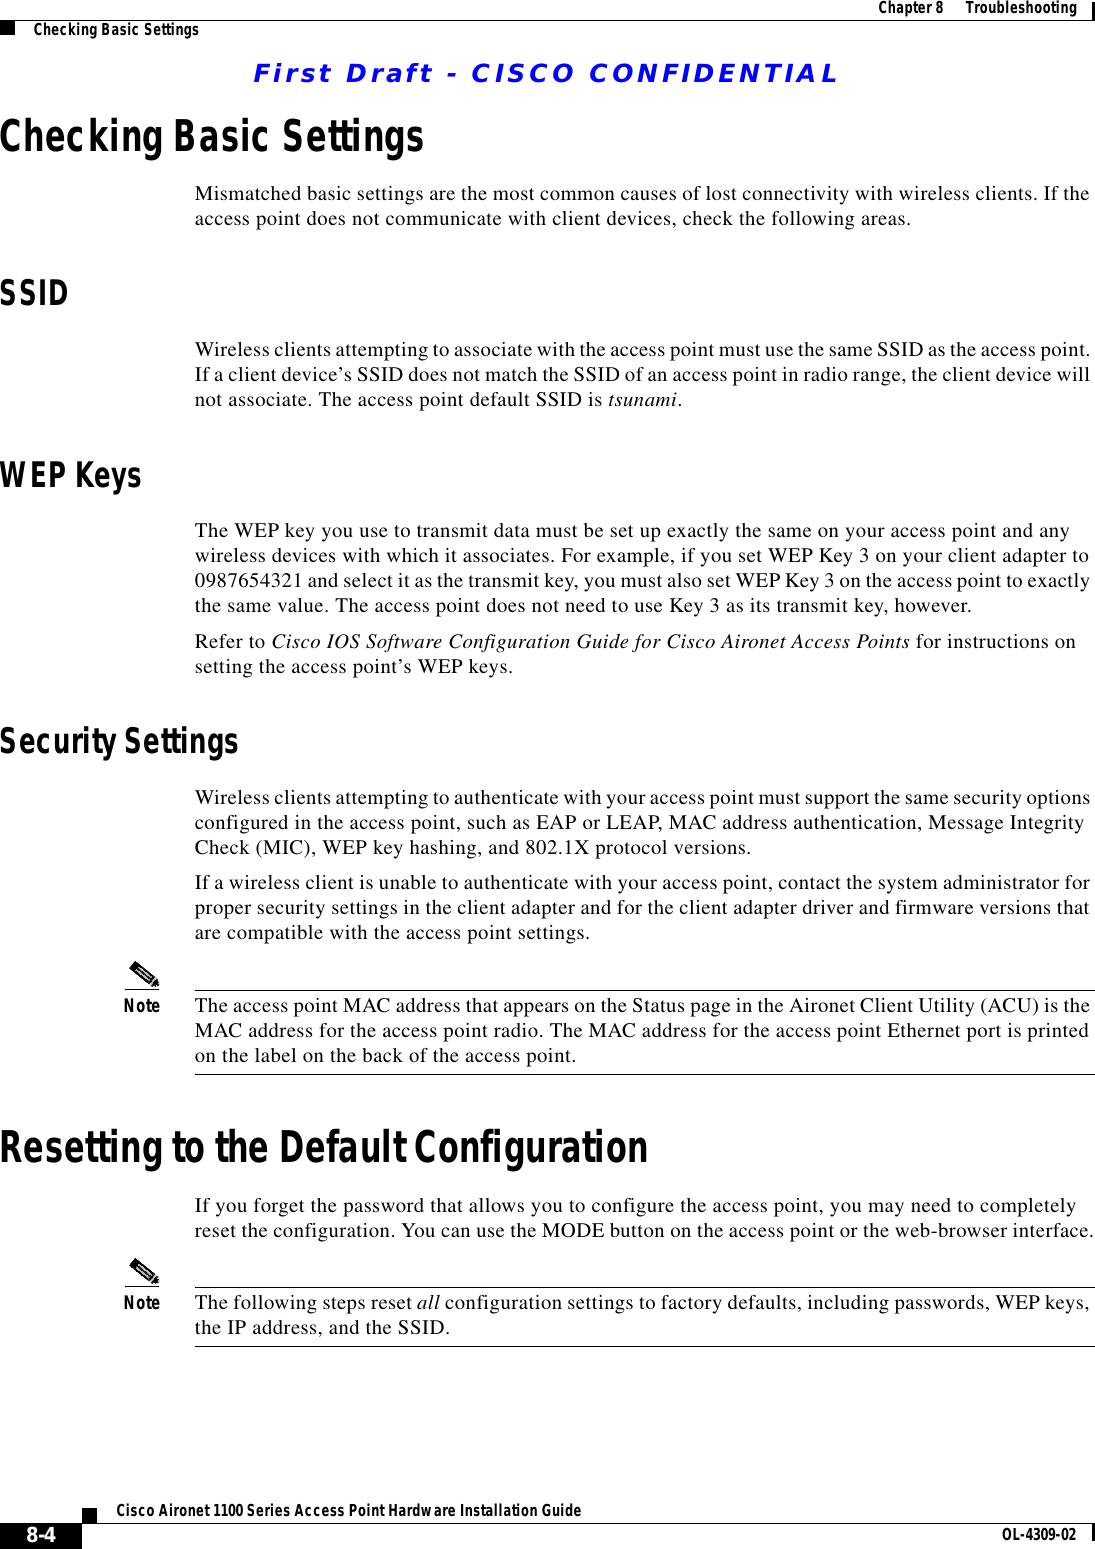 First Draft - CISCO CONFIDENTIAL8-4Cisco Aironet 1100 Series Access Point Hardware Installation Guide OL-4309-02Chapter8      TroubleshootingChecking Basic SettingsChecking Basic SettingsMismatched basic settings are the most common causes of lost connectivity with wireless clients. If the access point does not communicate with client devices, check the following areas.SSIDWireless clients attempting to associate with the access point must use the same SSID as the access point. If a client device’s SSID does not match the SSID of an access point in radio range, the client device will not associate. The access point default SSID is tsunami.WEP KeysThe WEP key you use to transmit data must be set up exactly the same on your access point and any wireless devices with which it associates. For example, if you set WEP Key 3 on your client adapter to 0987654321 and select it as the transmit key, you must also set WEP Key 3 on the access point to exactly the same value. The access point does not need to use Key 3 as its transmit key, however.Refer to Cisco IOS Software Configuration Guide for Cisco Aironet Access Points for instructions on setting the access point’s WEP keys.Security SettingsWireless clients attempting to authenticate with your access point must support the same security options configured in the access point, such as EAP or LEAP, MAC address authentication, Message Integrity Check (MIC), WEP key hashing, and 802.1X protocol versions.If a wireless client is unable to authenticate with your access point, contact the system administrator for proper security settings in the client adapter and for the client adapter driver and firmware versions that are compatible with the access point settings.Note The access point MAC address that appears on the Status page in the Aironet Client Utility (ACU) is the MAC address for the access point radio. The MAC address for the access point Ethernet port is printed on the label on the back of the access point.Resetting to the Default ConfigurationIf you forget the password that allows you to configure the access point, you may need to completely reset the configuration. You can use the MODE button on the access point or the web-browser interface.Note The following steps reset all configuration settings to factory defaults, including passwords, WEP keys, the IP address, and the SSID. 